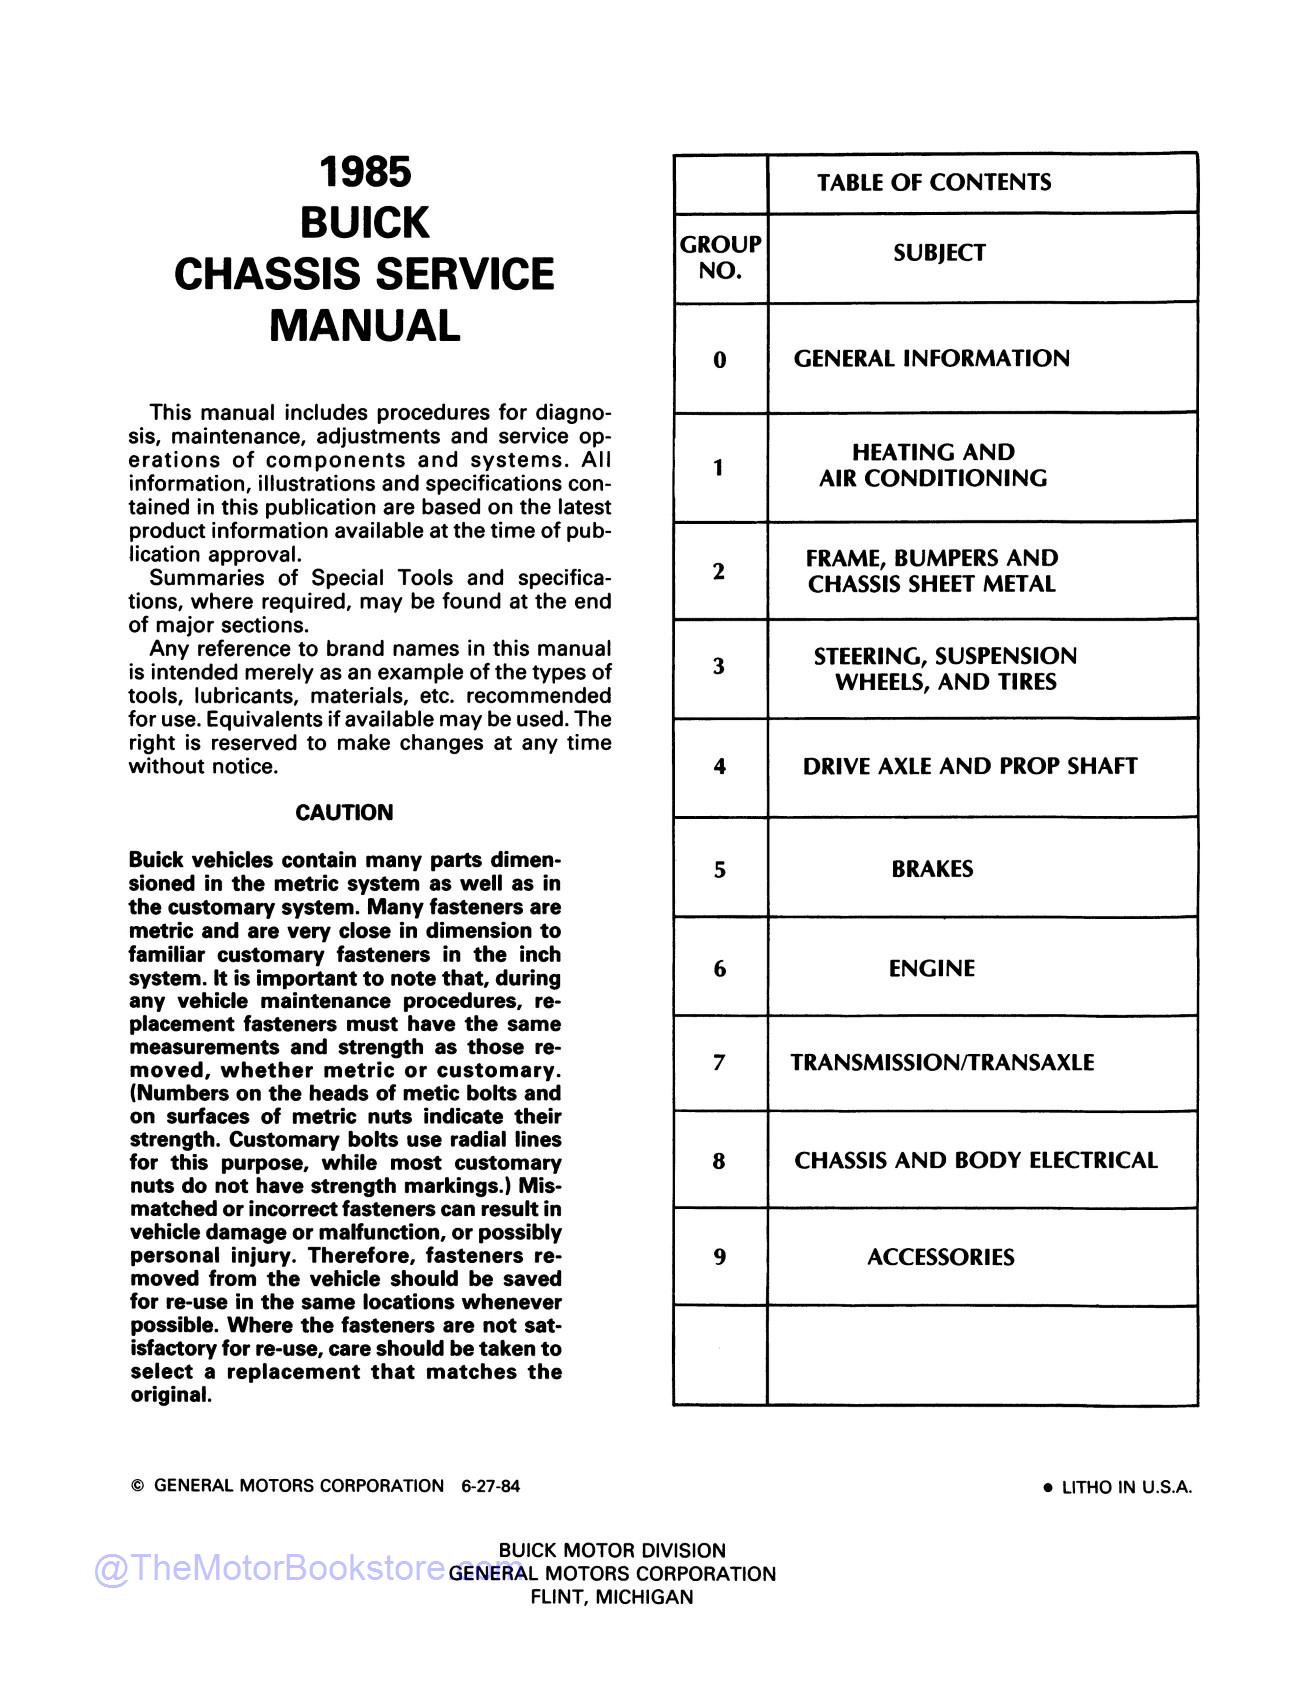 1985 Buick and Grand National Service Manual  - Table of Contents